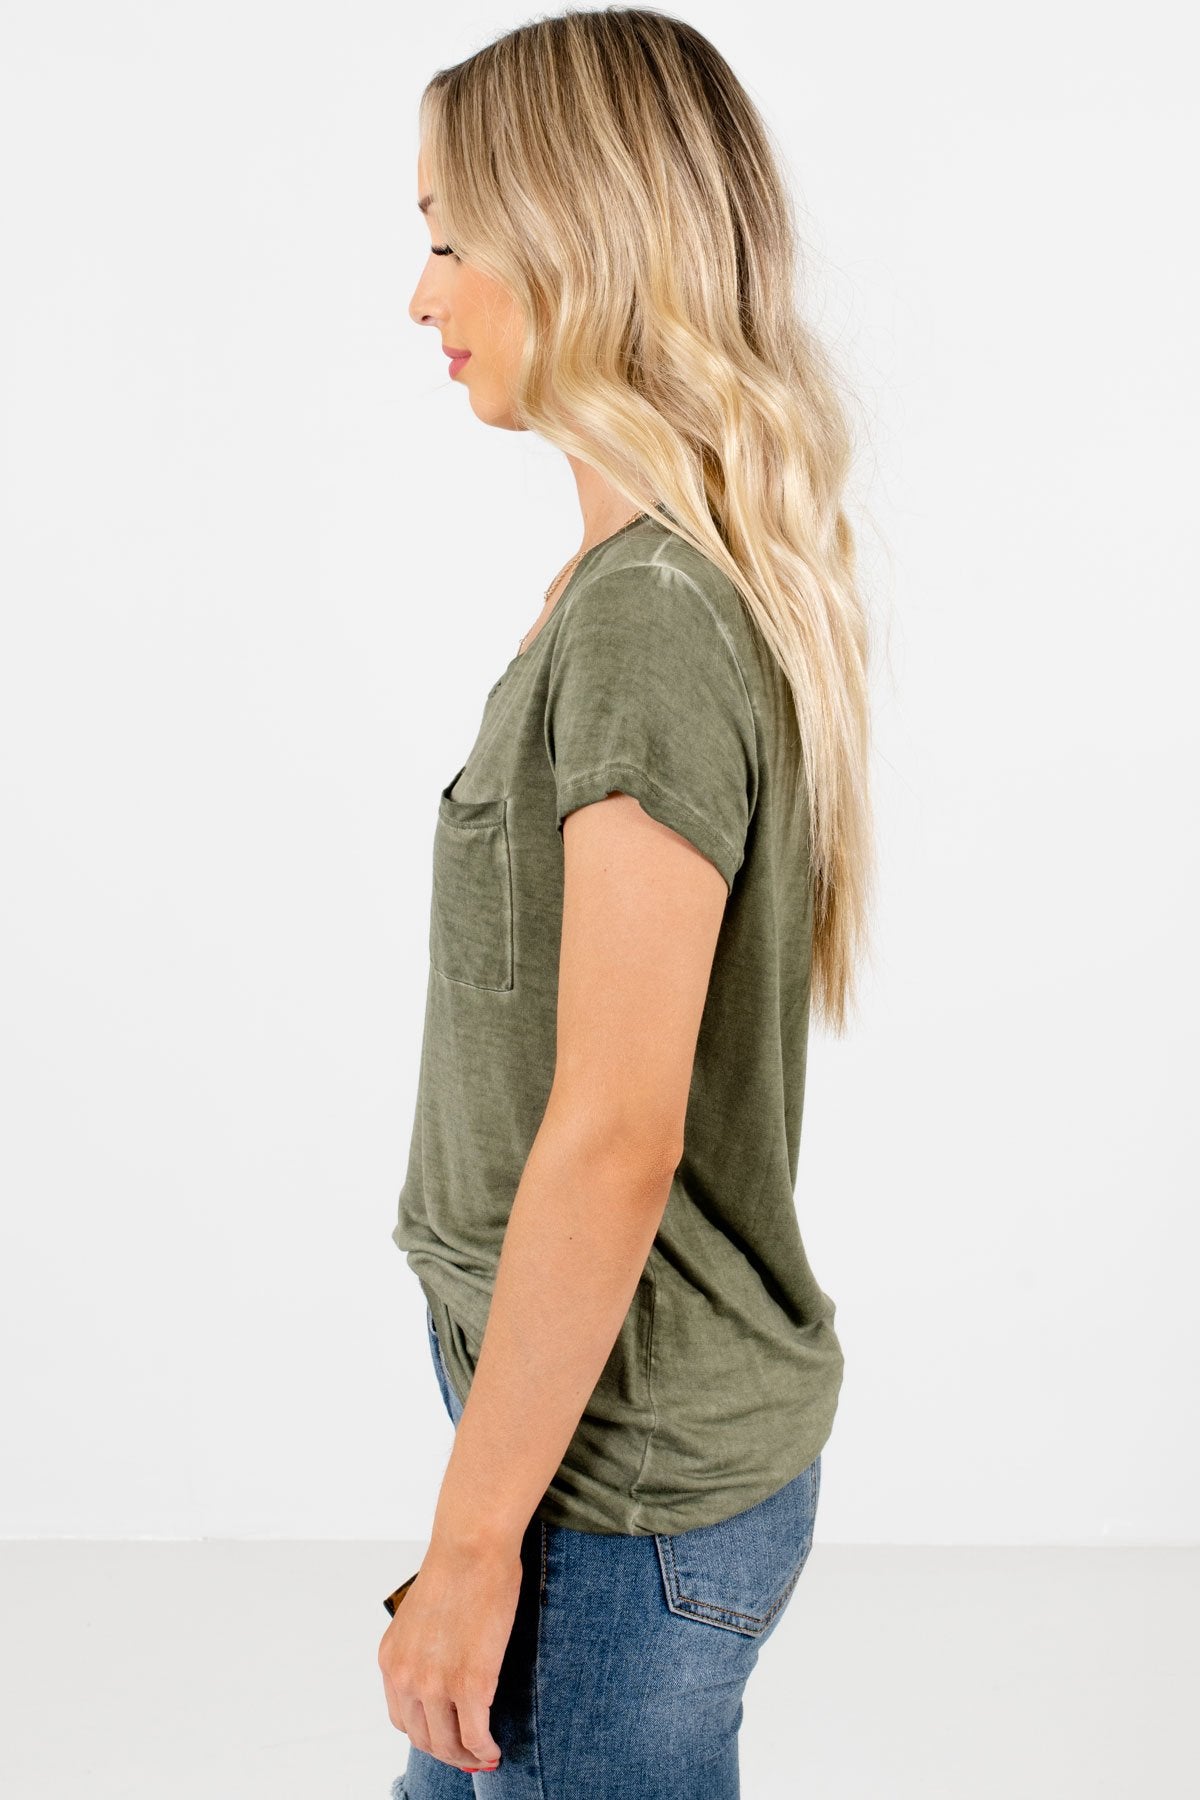 Green Lightweight High-Quality Material Boutique Tees for Women